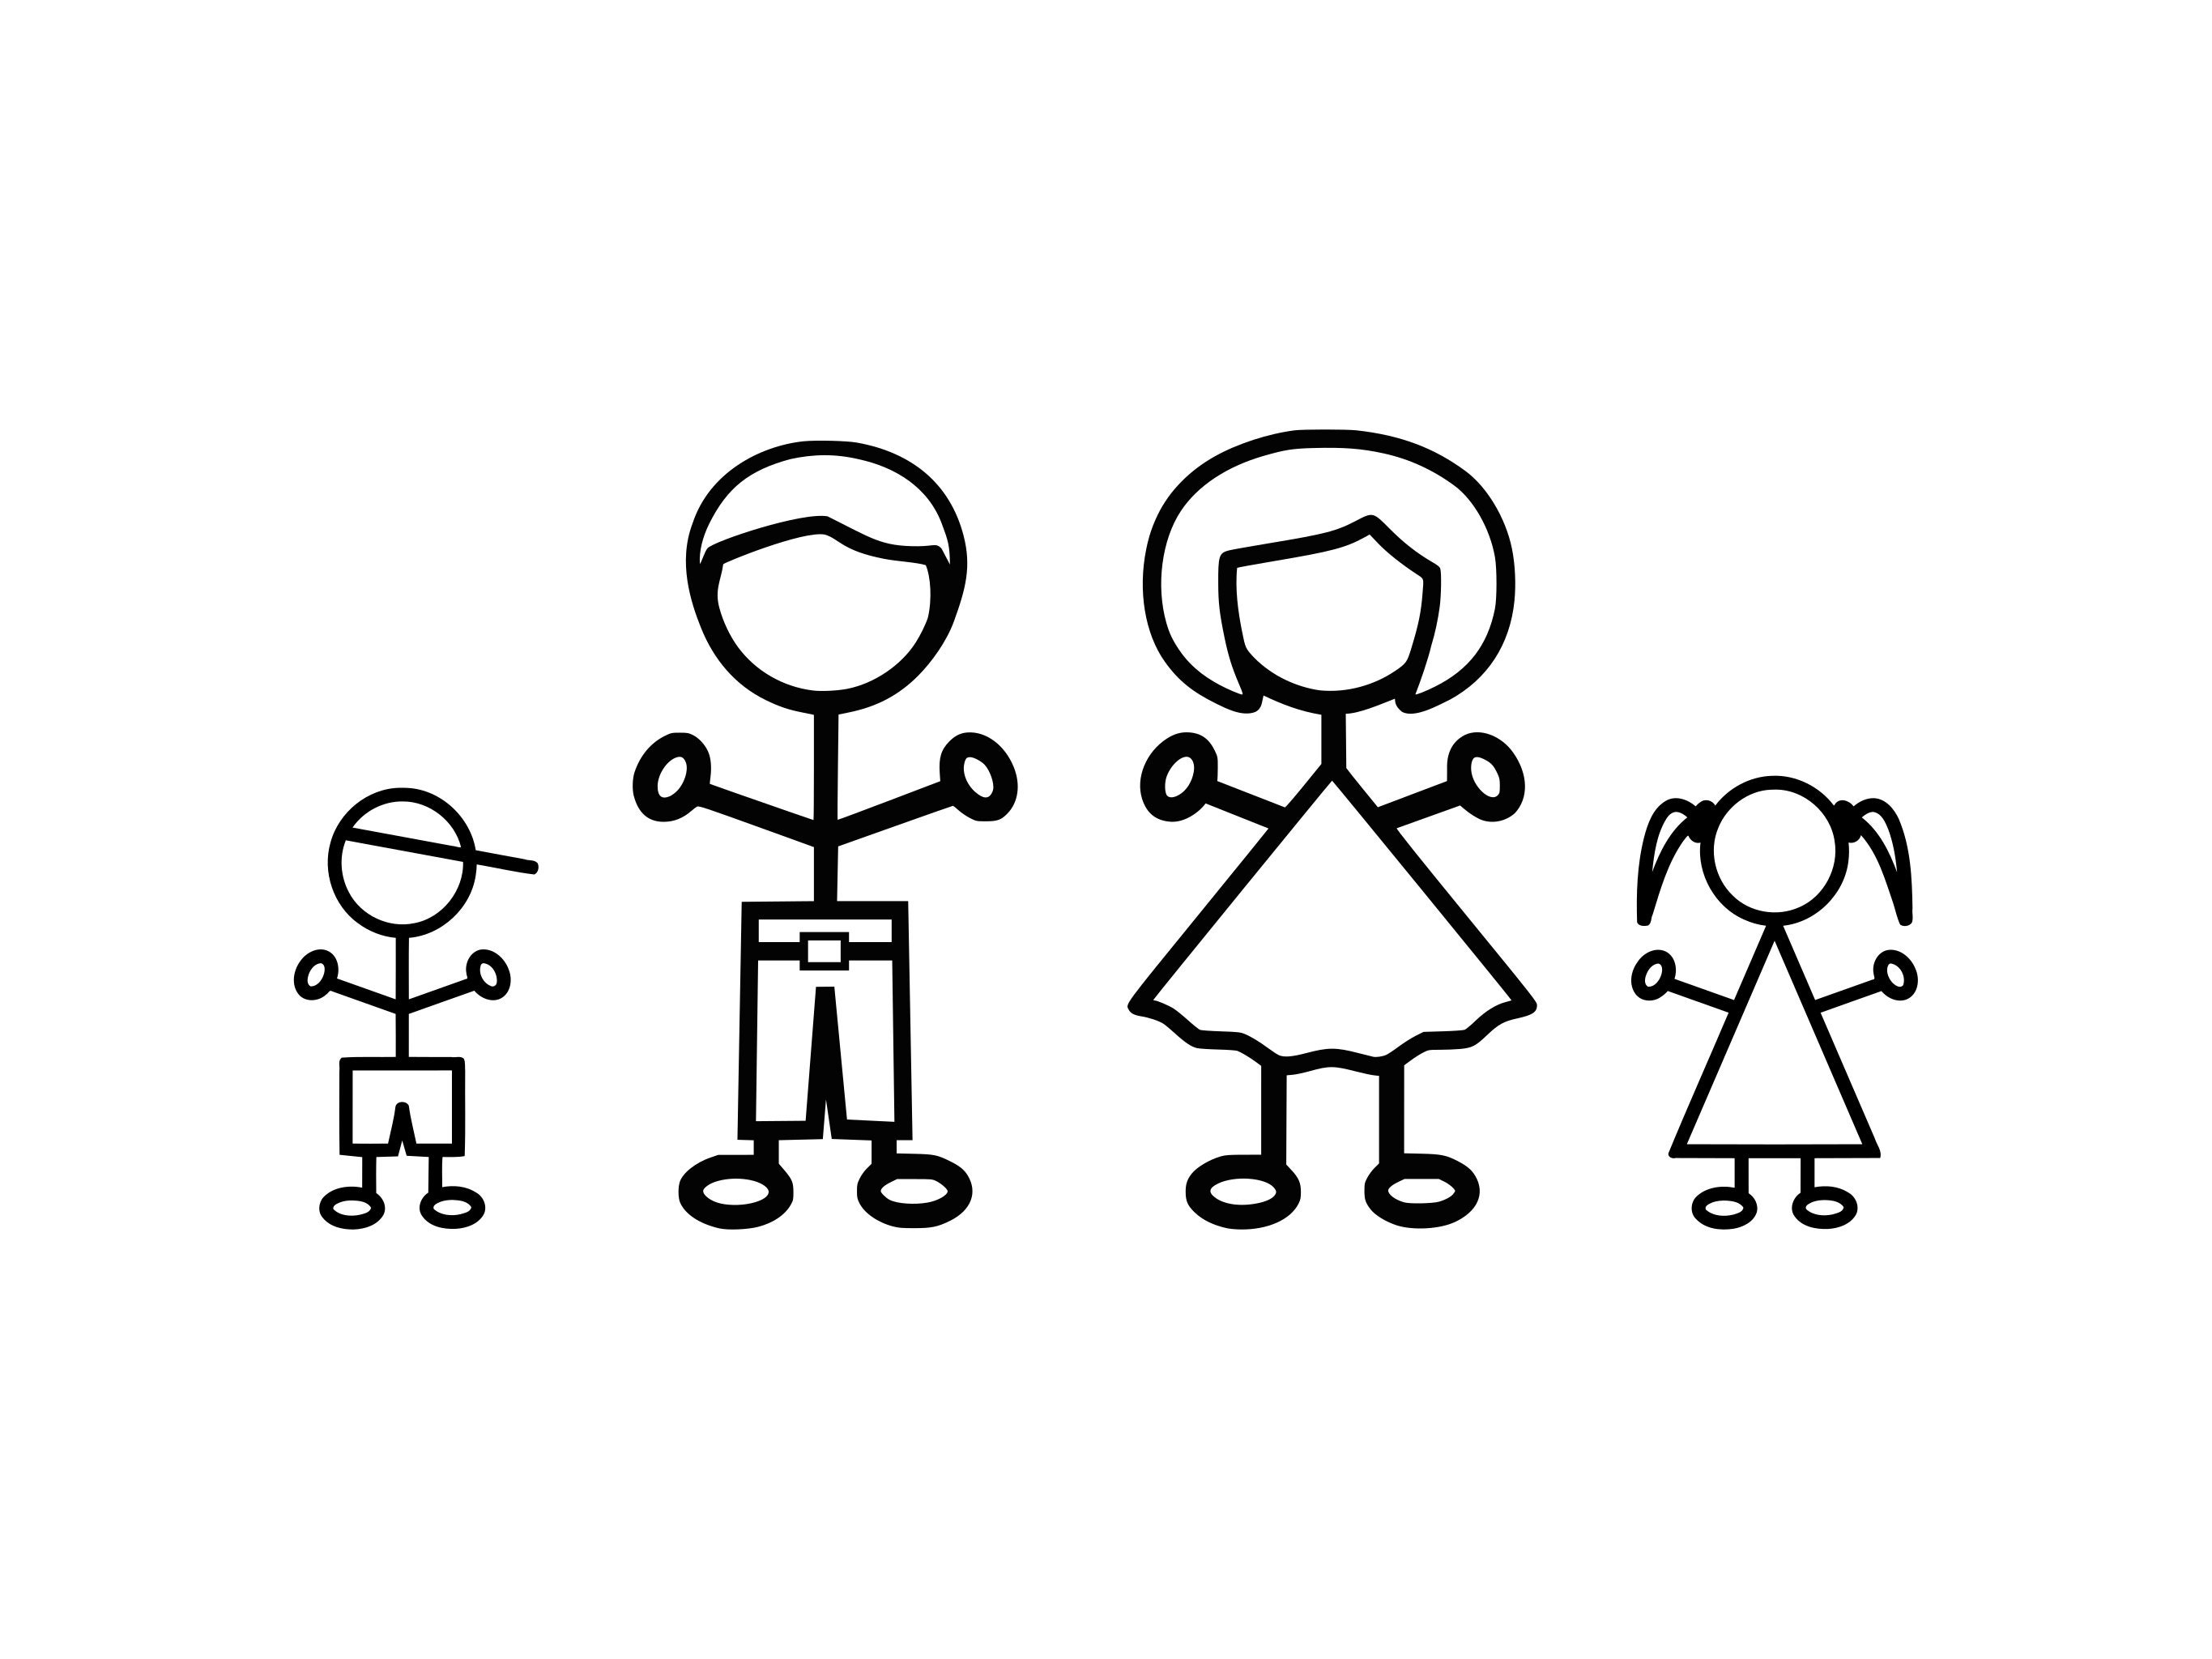 Download Stick Family Svg File Stick People Svg Files Stick Figure Clipart Stick Figure Svg Stick Figure Family Svg Vector Png Dxf Jpg